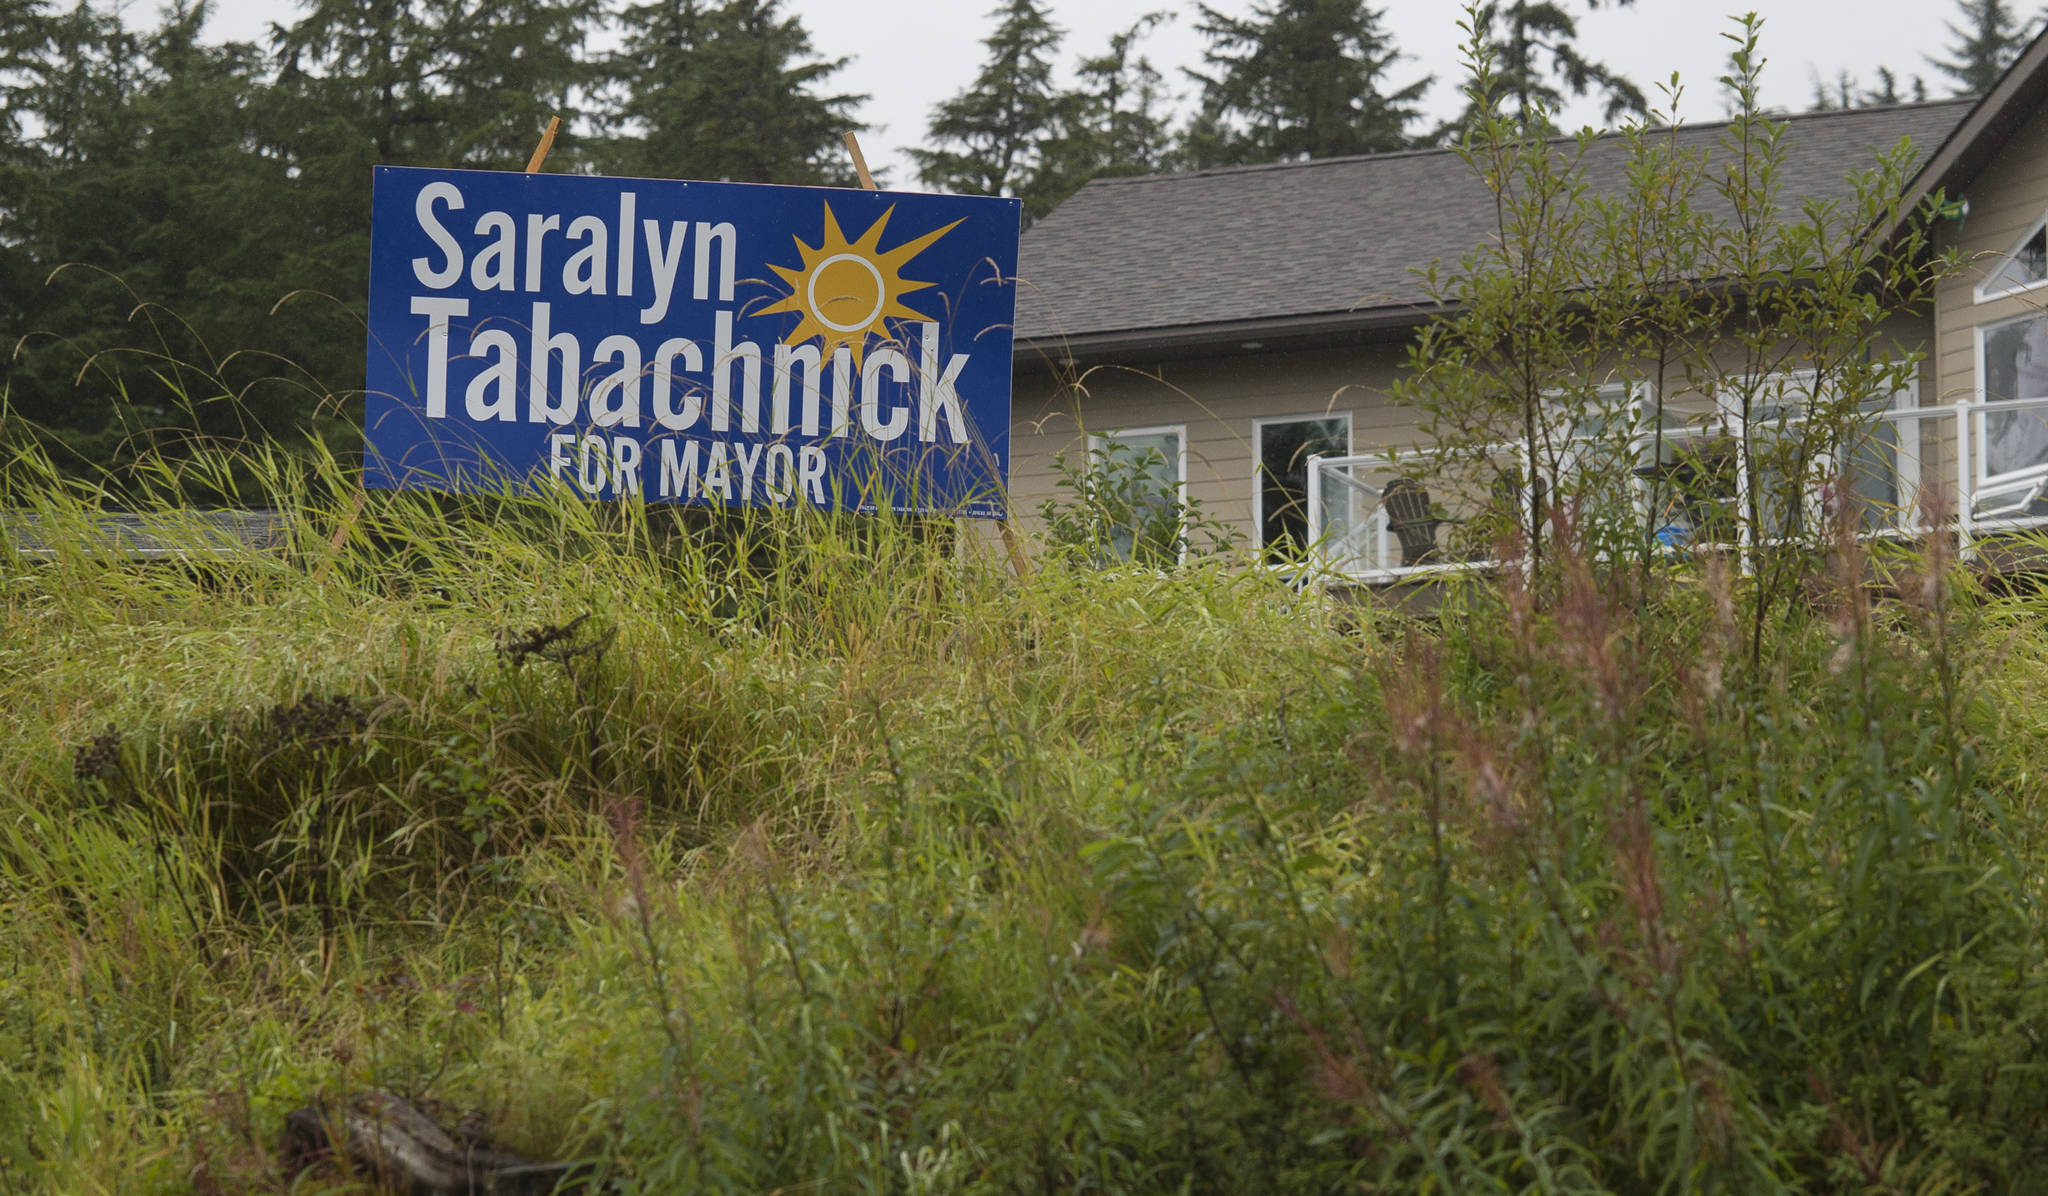 A Saralyn Tabachnick for mayor election sign on Mendenhall Loop Road on Friday, Aug. 24, 2018. Alaska statute states signs on private or commercial property cannot be located within 660 feet of a state-maintained road or “with the purpose of their message being read from the main traveled way.” (Michael Penn | Juneau Empire)